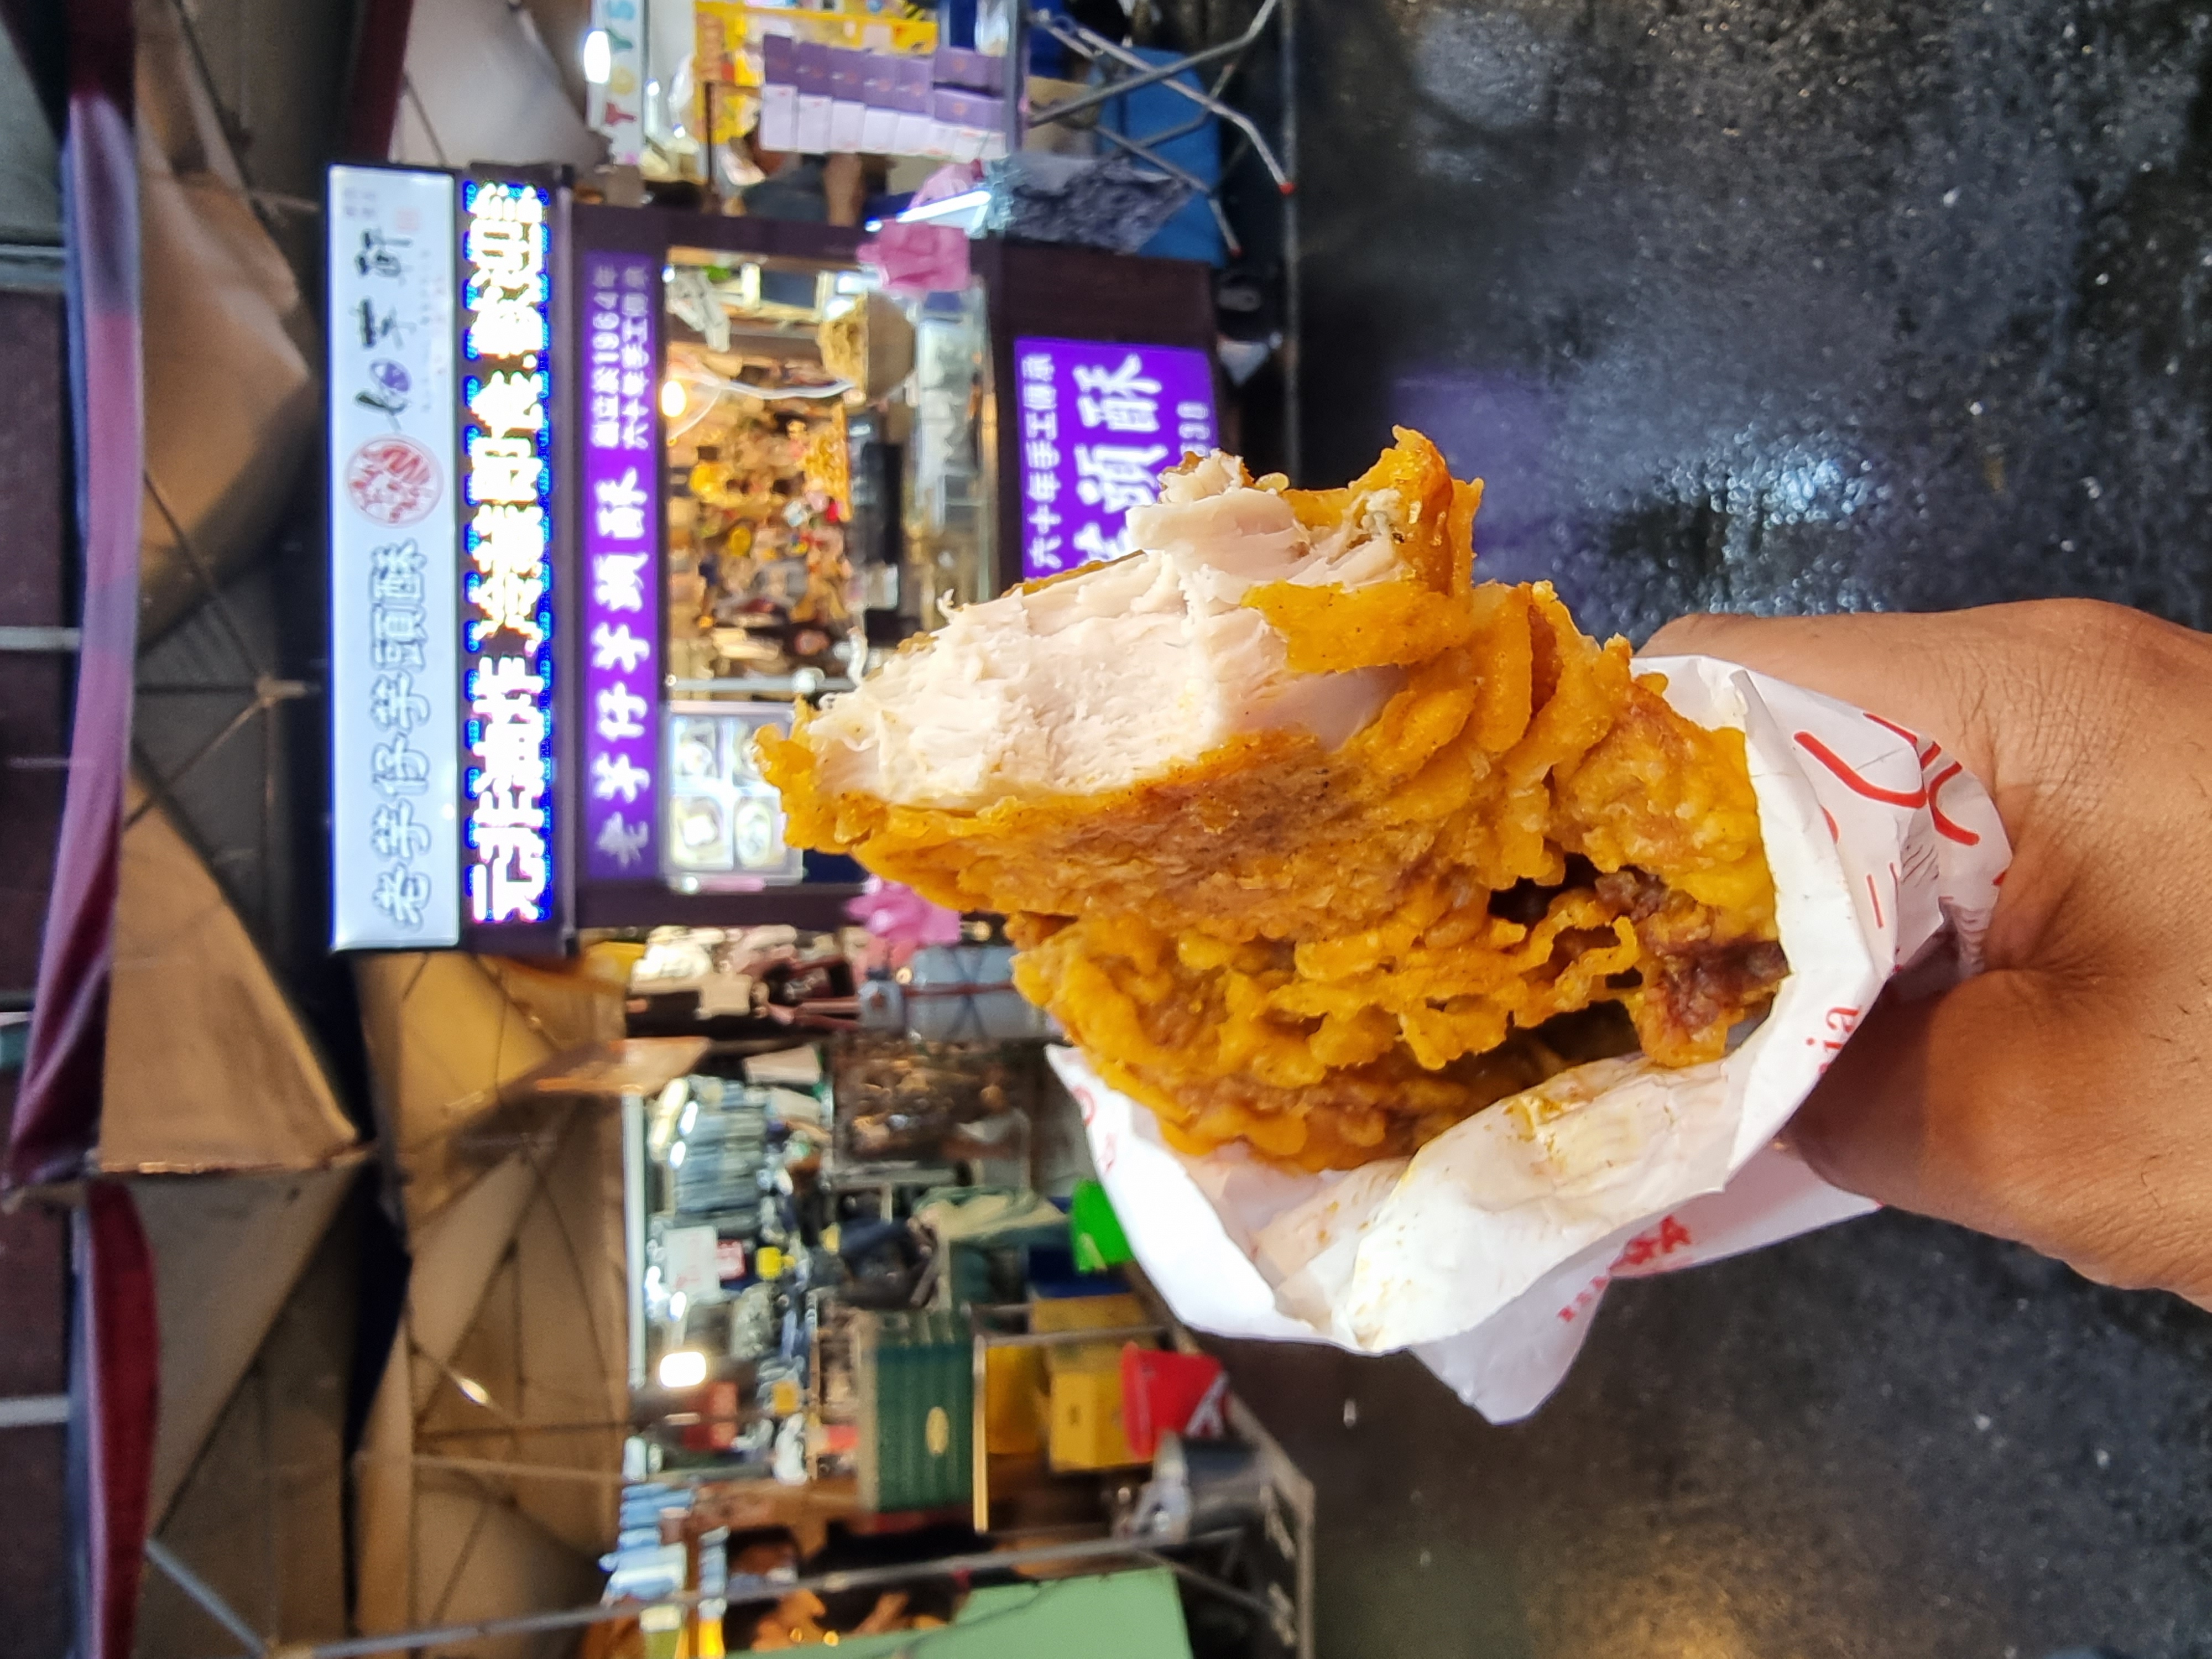 20230616_175247 What to Eat in Taipei: Taiwan's Street Food Culture